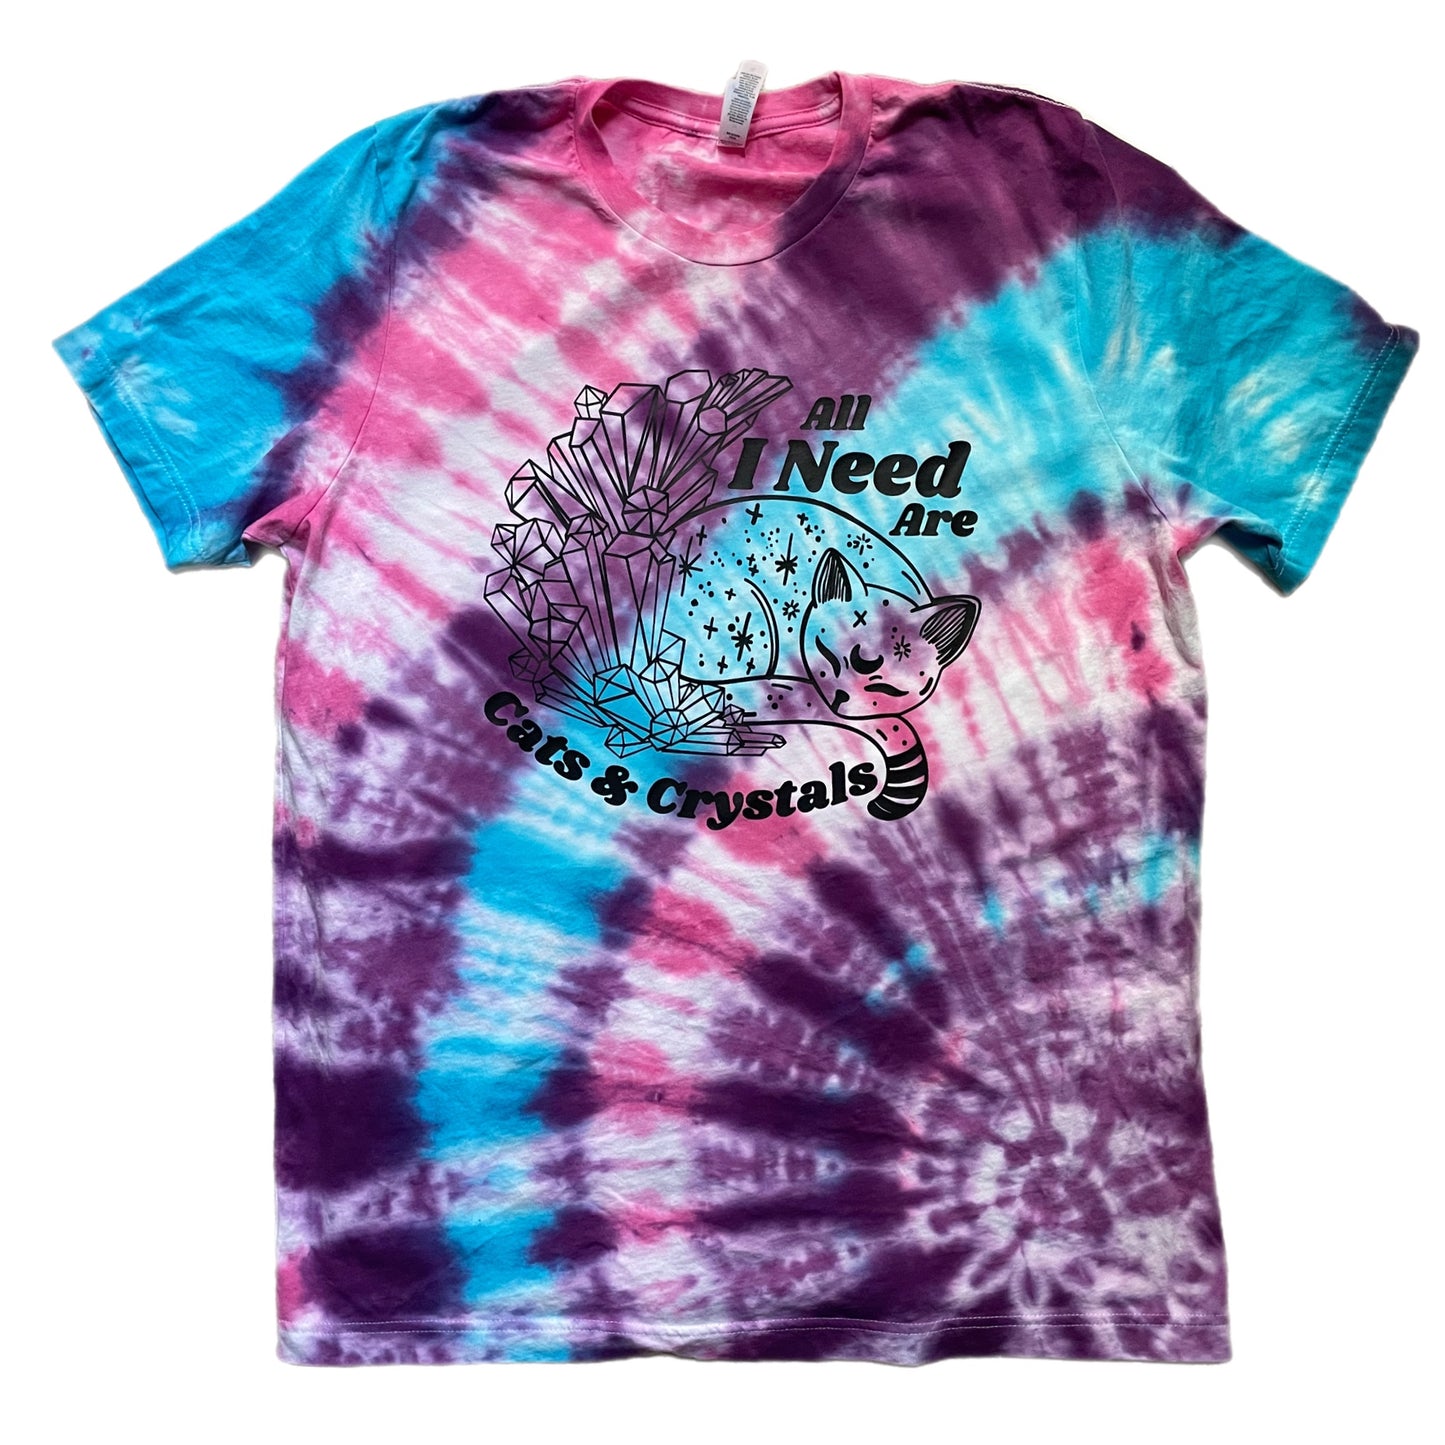 Cats and Crystals Tie Dye T-Shirt